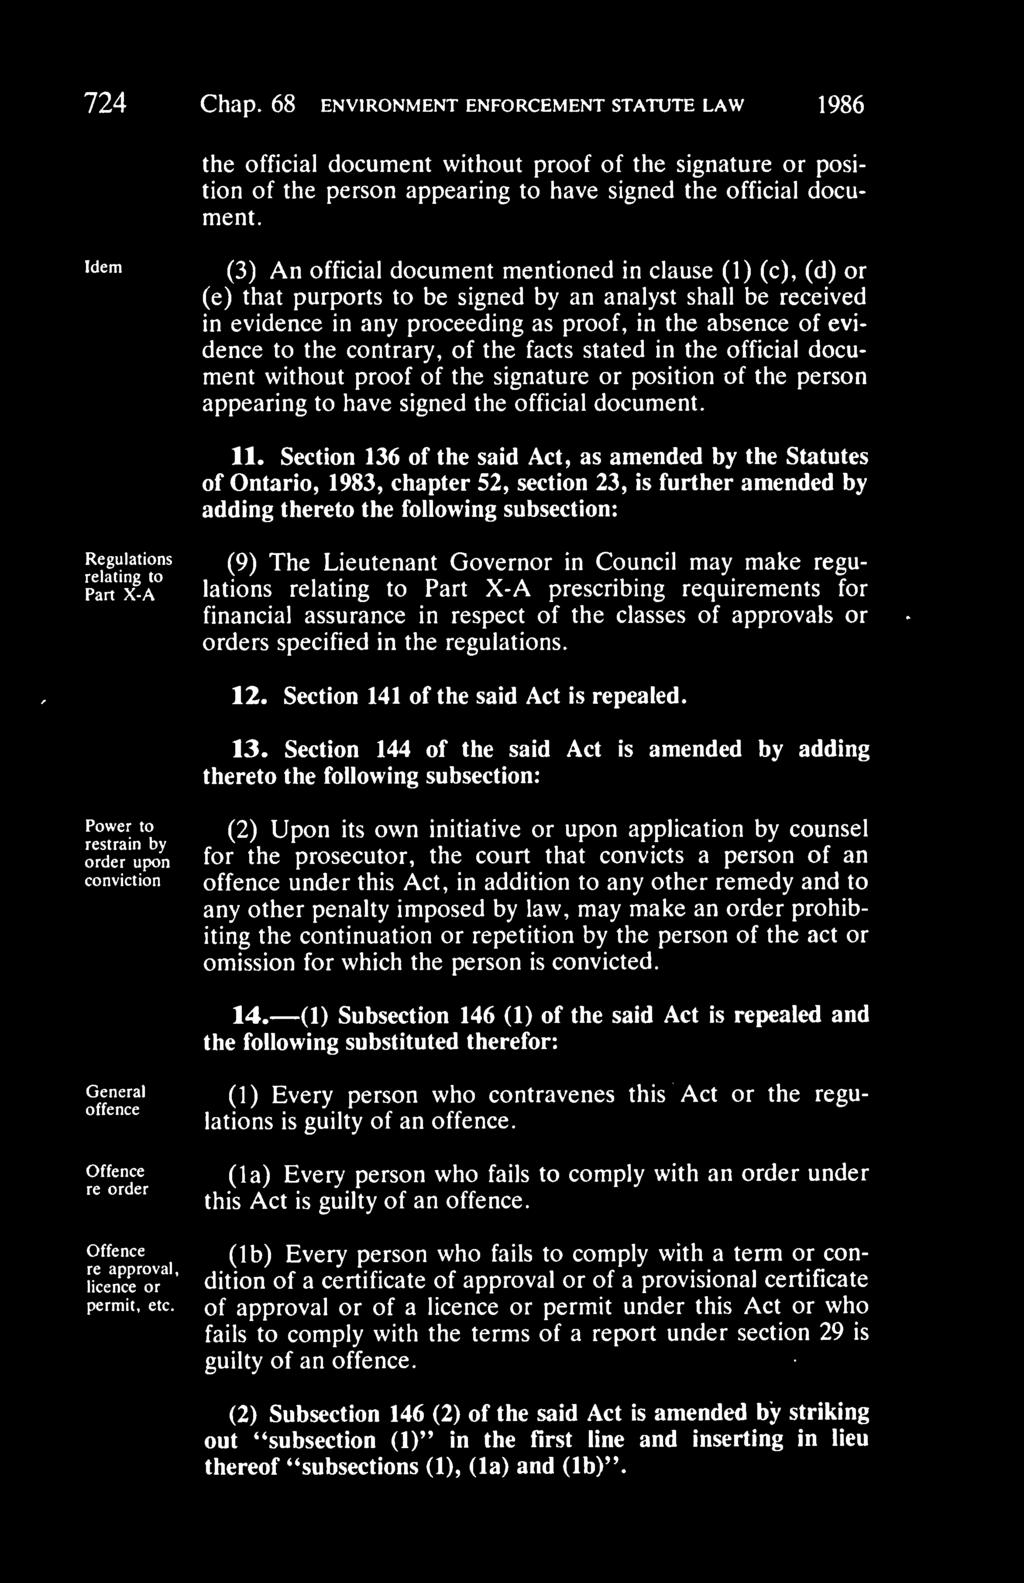 724 Chap. 68 ENVIRONMENT ENFORCEMENT STATUTE LAW 1986 the official document without proof of the signature or position of the person appearing to have signed the official document.